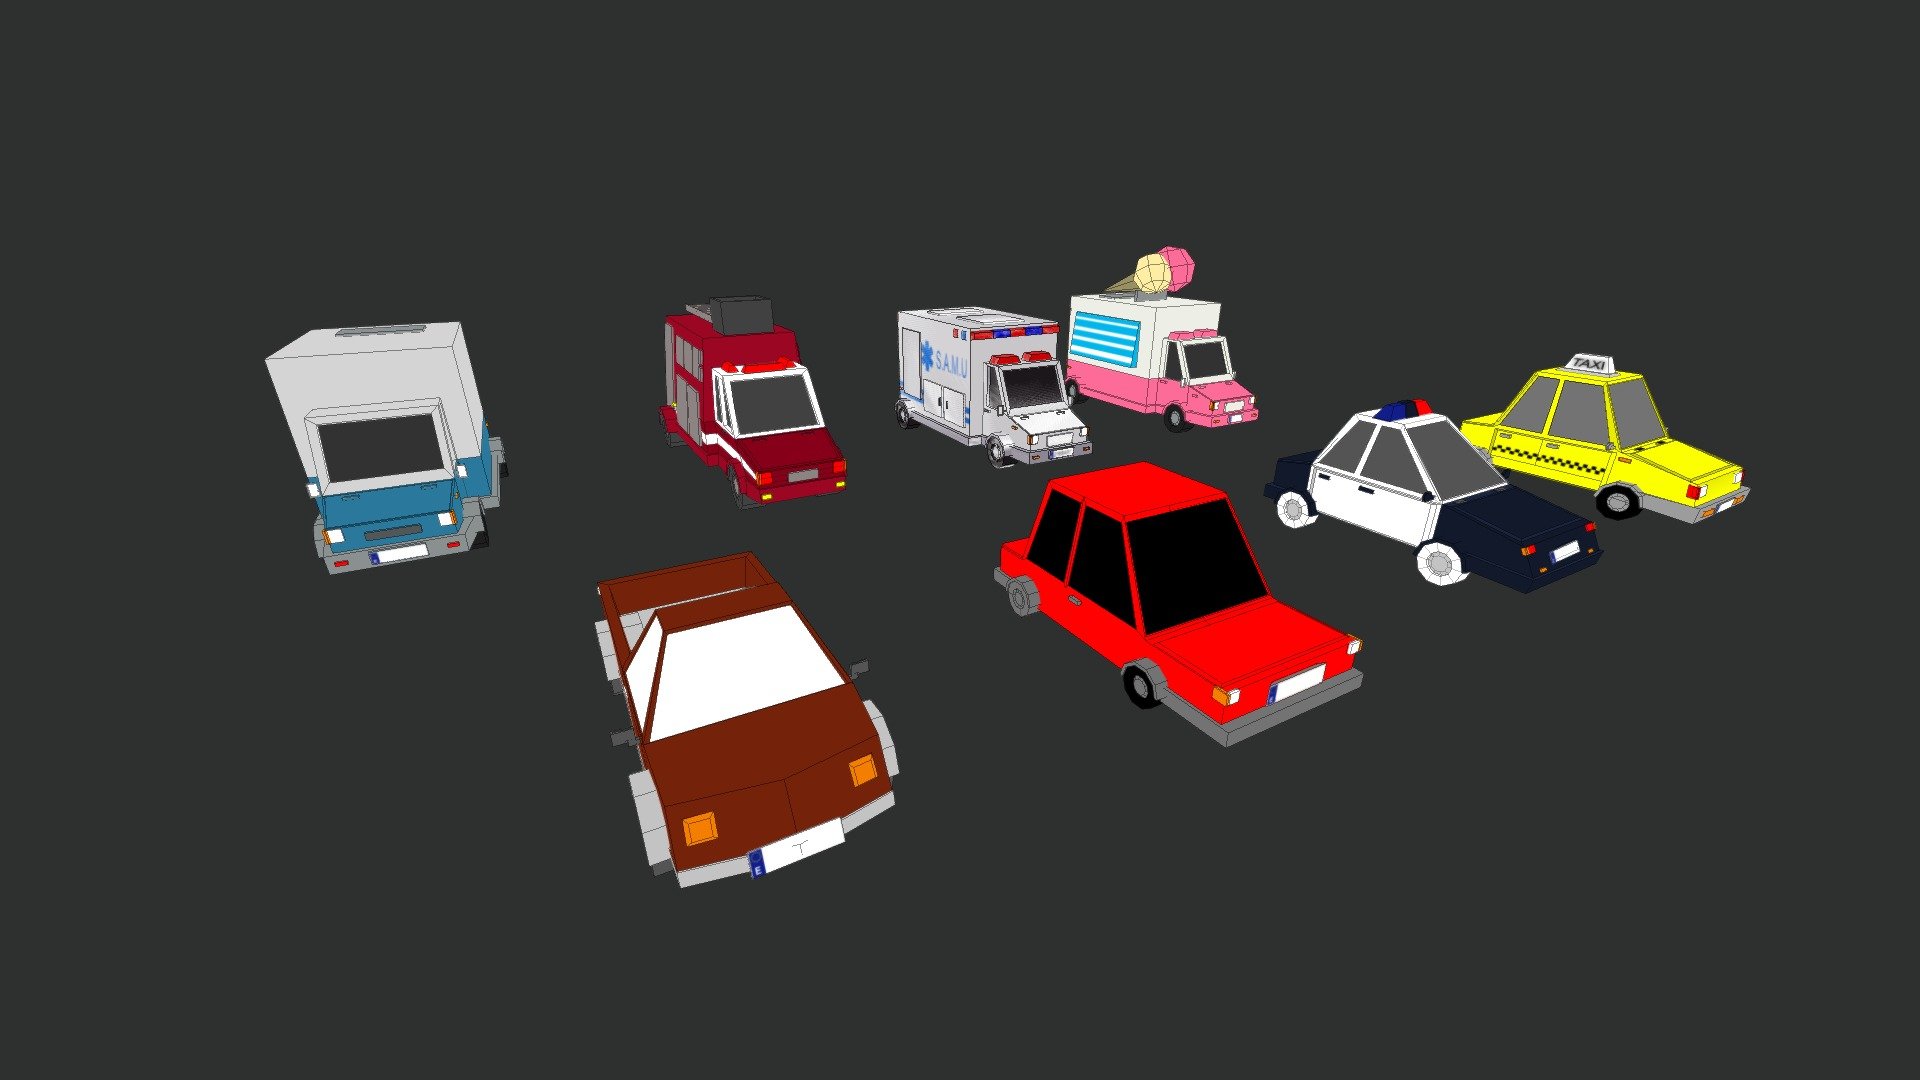 Low poly cars
8 lowpoly cartoonish cars with texture:




Ambulance

Truck

Pick-up truck

Firefighter truck

Icecream truck

Taxi

Police car

Car
 - 8 Lowpoly Cars - 3D model by Pia (@Zombiscuit) 3d model